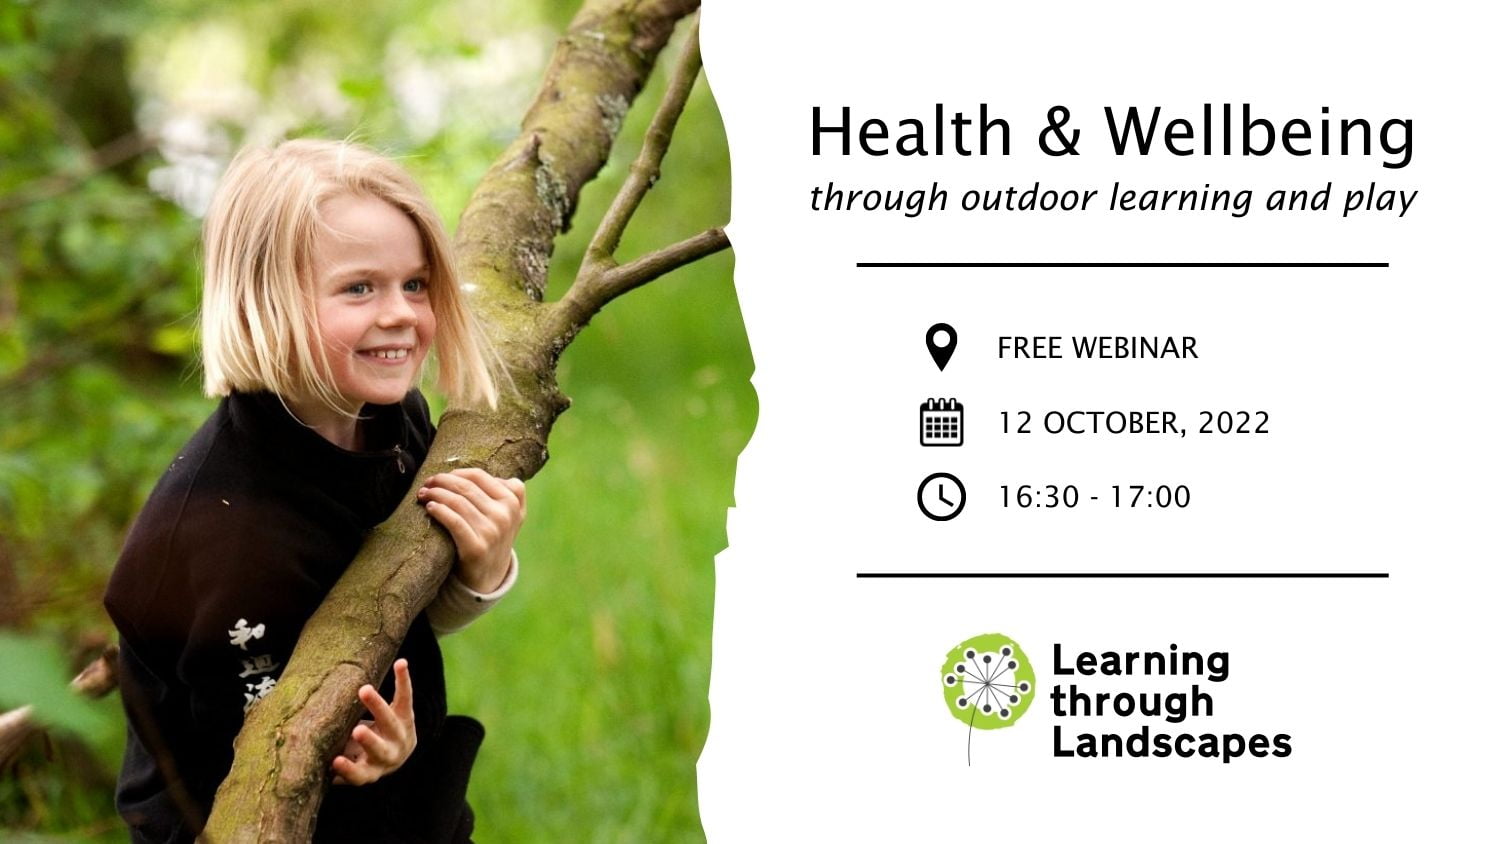 A free webinar on 'Health and Wellbeing through Outdoor Learning and Play'